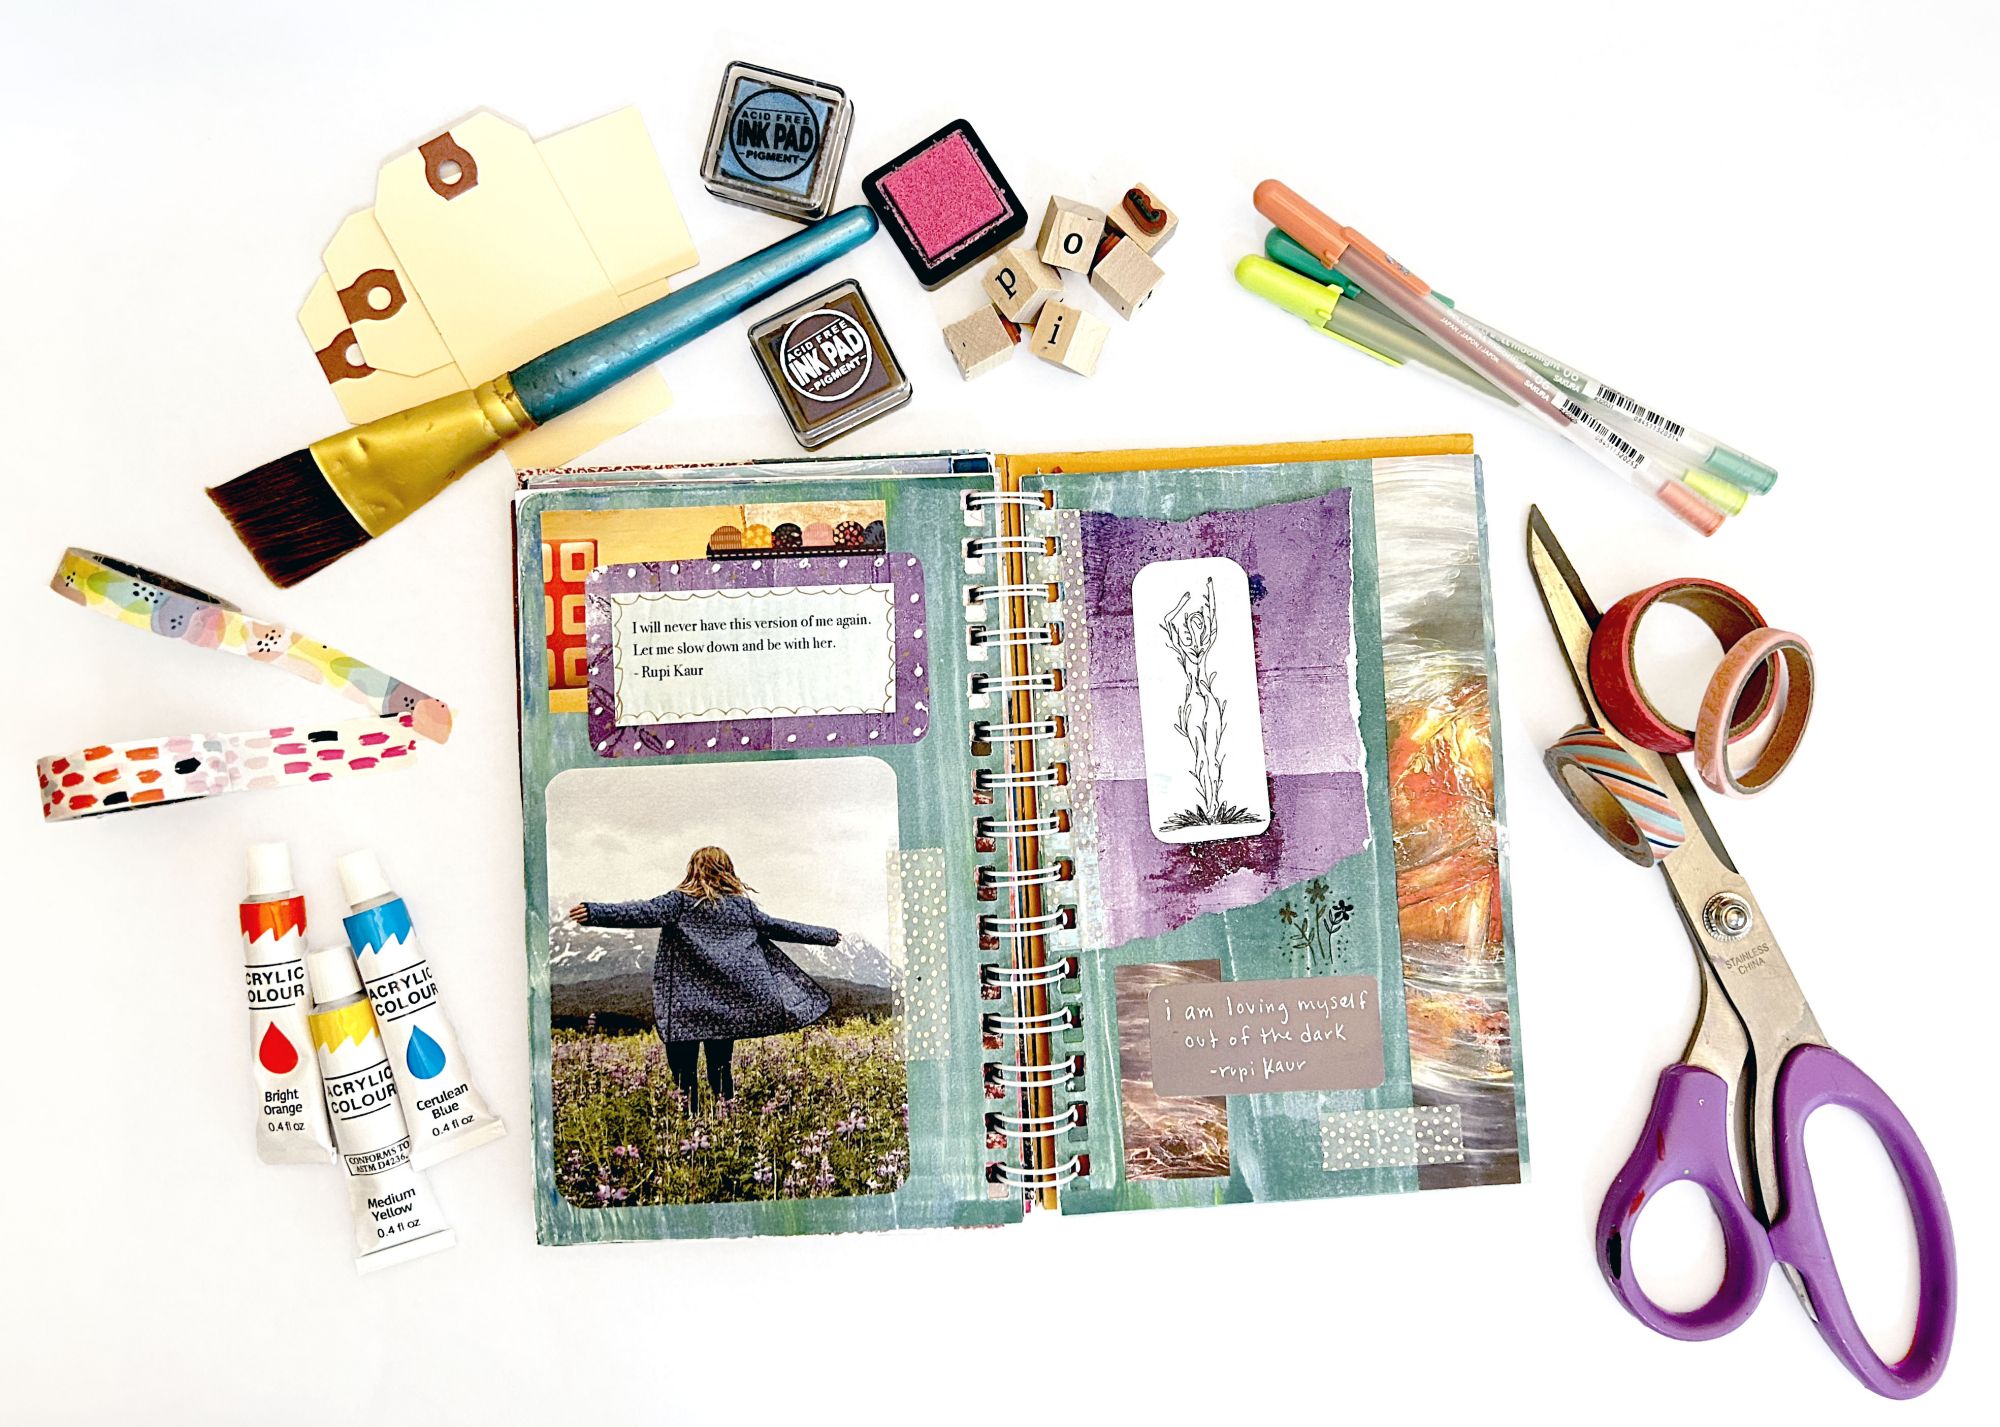 An image of a notebook, scissors and other craft supplies